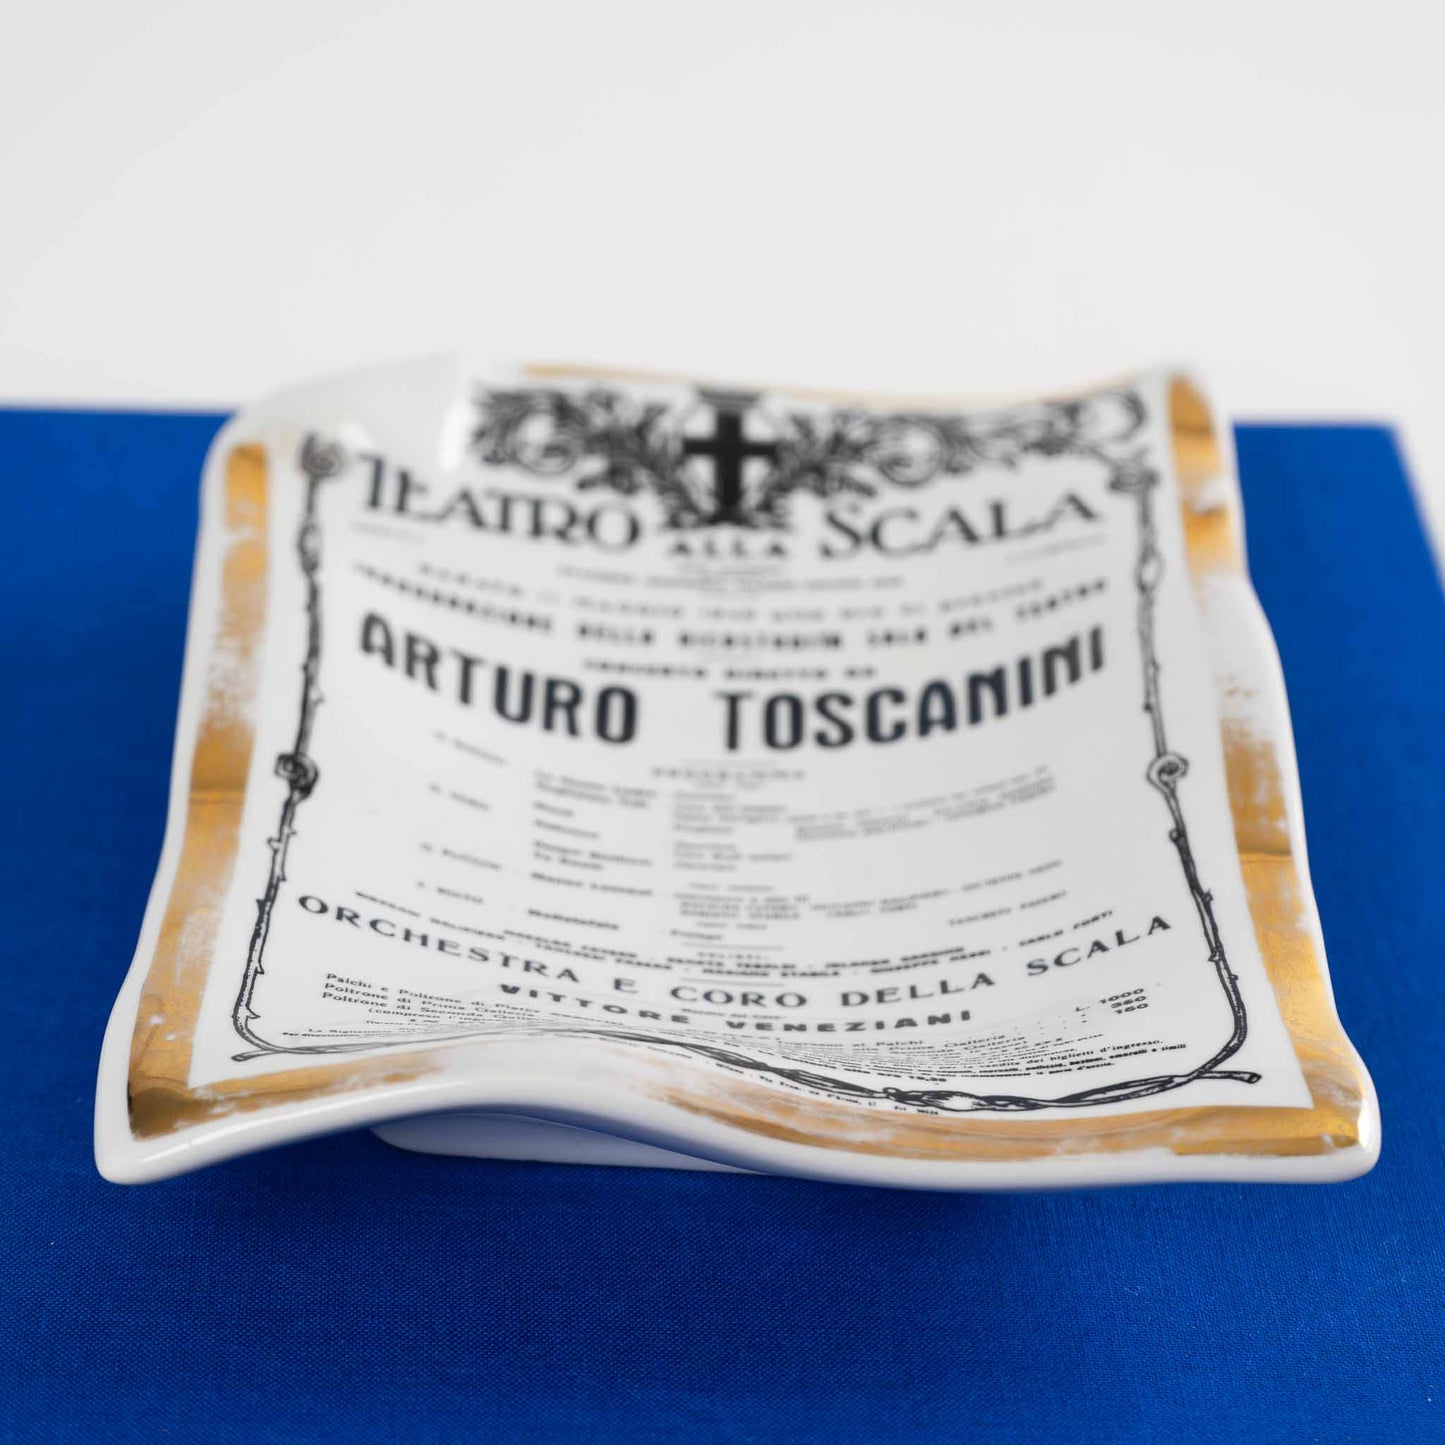 Vintage Fornasetti Ceramic Tray with Toscanini Print